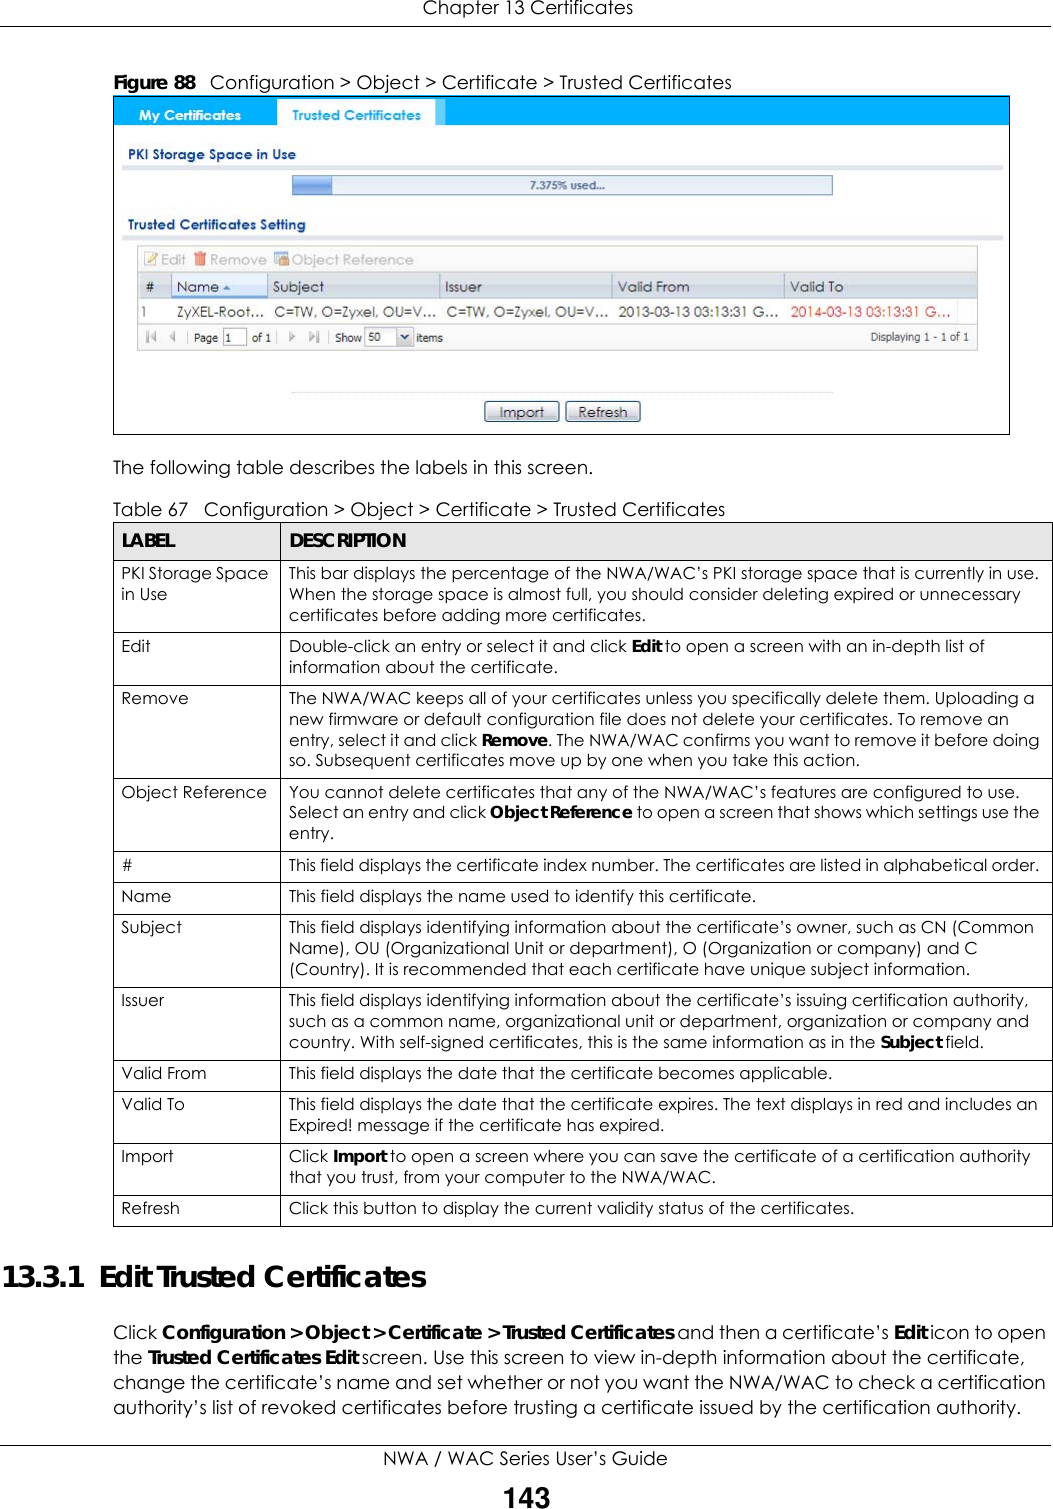  Chapter 13 CertificatesNWA / WAC Series User’s Guide143Figure 88   Configuration &gt; Object &gt; Certificate &gt; Trusted Certificates The following table describes the labels in this screen.  13.3.1  Edit Trusted CertificatesClick Configuration &gt; Object &gt; Certificate &gt; Trusted Certificates and then a certificate’s Edit icon to open the Trusted Certificates Edit screen. Use this screen to view in-depth information about the certificate, change the certificate’s name and set whether or not you want the NWA/WAC to check a certification authority’s list of revoked certificates before trusting a certificate issued by the certification authority.Table 67   Configuration &gt; Object &gt; Certificate &gt; Trusted CertificatesLABEL DESCRIPTIONPKI Storage Space in UseThis bar displays the percentage of the NWA/WAC’s PKI storage space that is currently in use. When the storage space is almost full, you should consider deleting expired or unnecessary certificates before adding more certificates.Edit Double-click an entry or select it and click Edit to open a screen with an in-depth list of information about the certificate.Remove The NWA/WAC keeps all of your certificates unless you specifically delete them. Uploading a new firmware or default configuration file does not delete your certificates. To remove an entry, select it and click Remove. The NWA/WAC confirms you want to remove it before doing so. Subsequent certificates move up by one when you take this action.Object Reference You cannot delete certificates that any of the NWA/WAC’s features are configured to use. Select an entry and click Object Reference to open a screen that shows which settings use the entry.# This field displays the certificate index number. The certificates are listed in alphabetical order. Name This field displays the name used to identify this certificate. Subject This field displays identifying information about the certificate’s owner, such as CN (Common Name), OU (Organizational Unit or department), O (Organization or company) and C (Country). It is recommended that each certificate have unique subject information.Issuer This field displays identifying information about the certificate’s issuing certification authority, such as a common name, organizational unit or department, organization or company and country. With self-signed certificates, this is the same information as in the Subject field.Valid From This field displays the date that the certificate becomes applicable. Valid To This field displays the date that the certificate expires. The text displays in red and includes an Expired! message if the certificate has expired.Import Click Import to open a screen where you can save the certificate of a certification authority that you trust, from your computer to the NWA/WAC.Refresh Click this button to display the current validity status of the certificates.